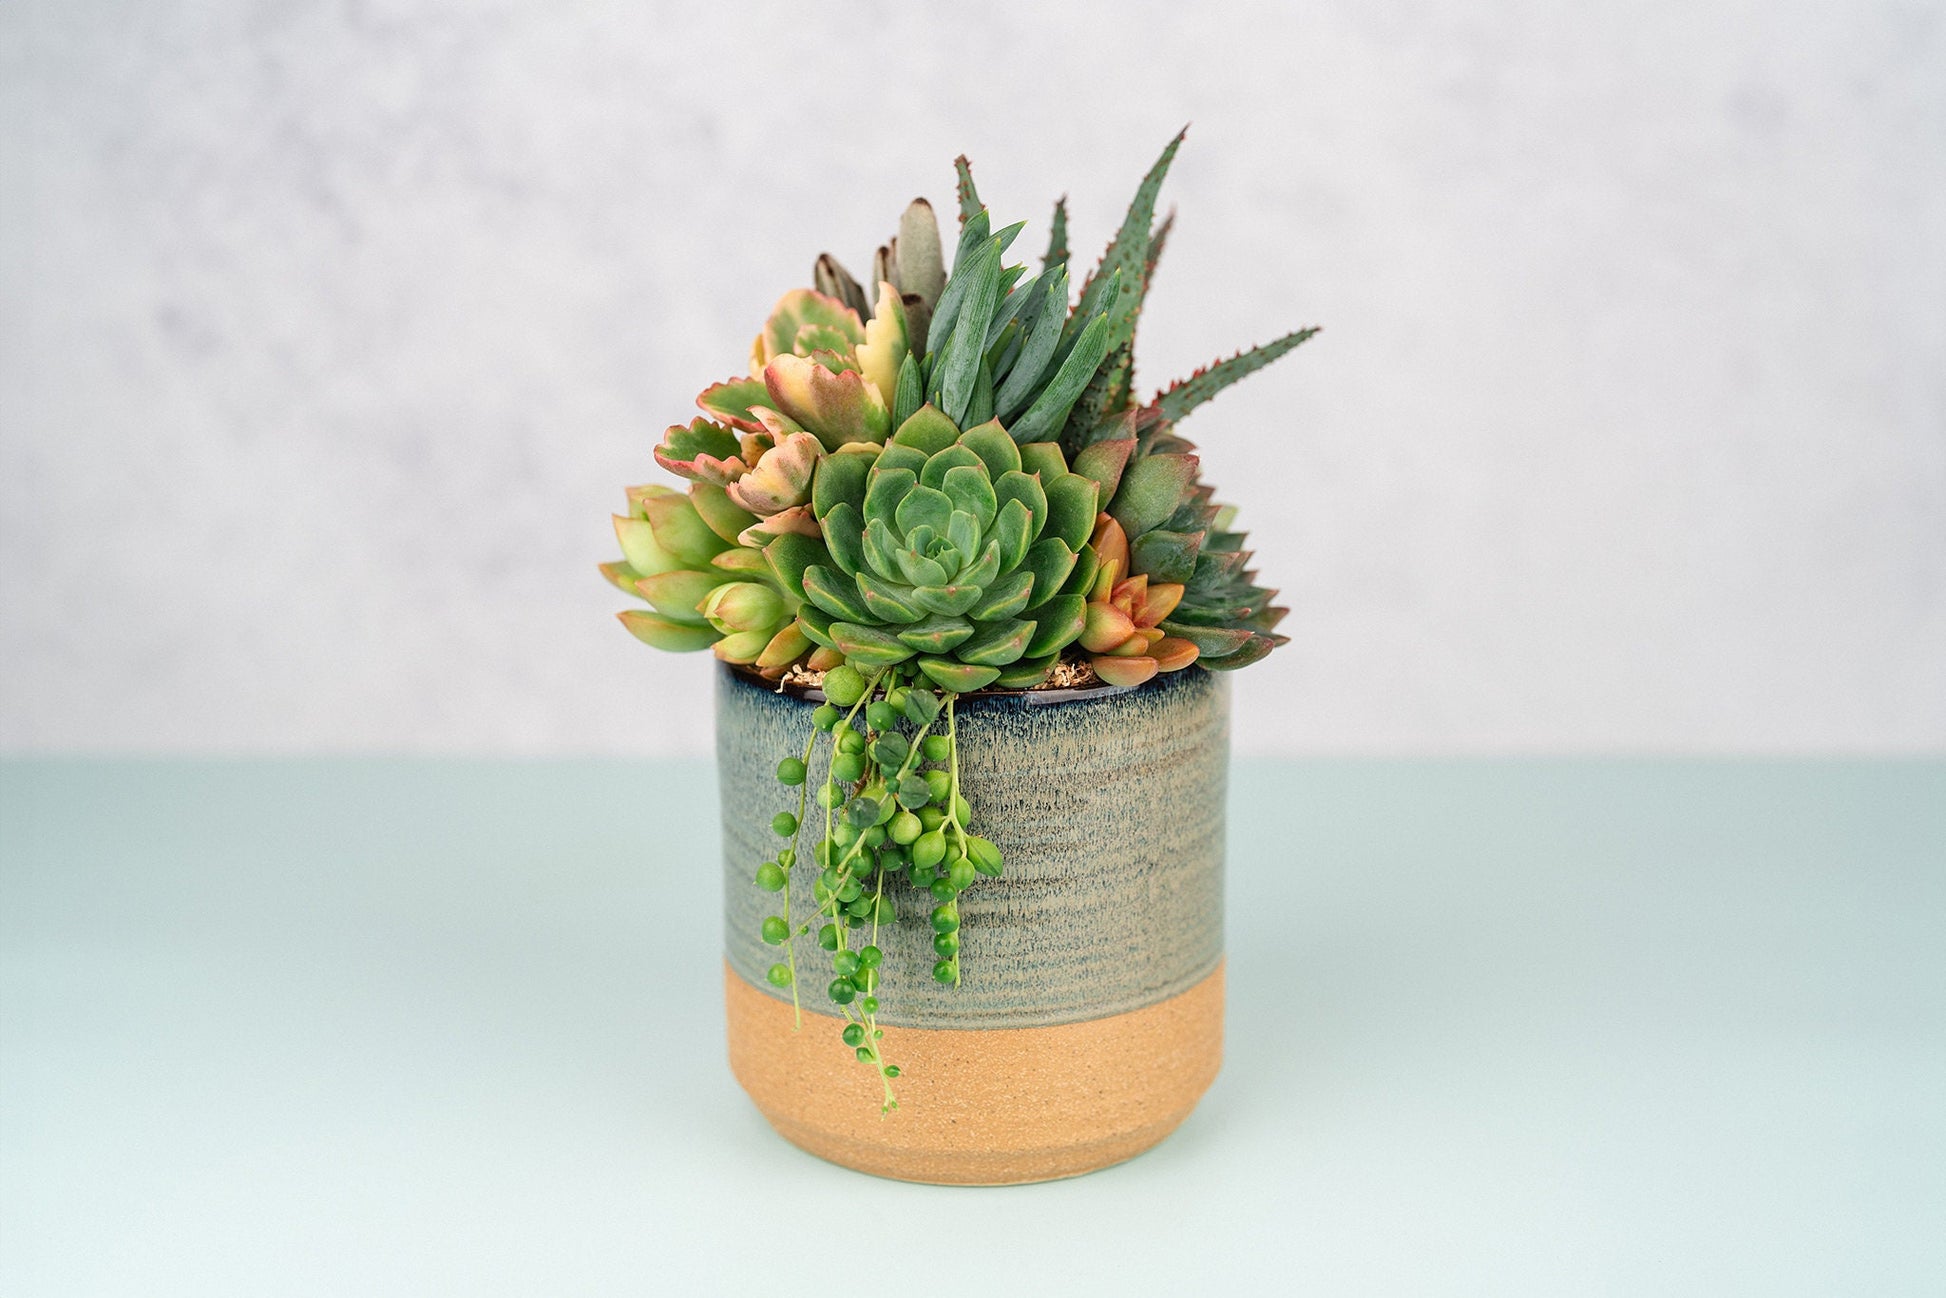 Two-Toned Blue & Terracotta Ceramic Succulent Arrangement Planter: Living Succulent Gift for Birthday, Thank you Gift, Housewarming Gift